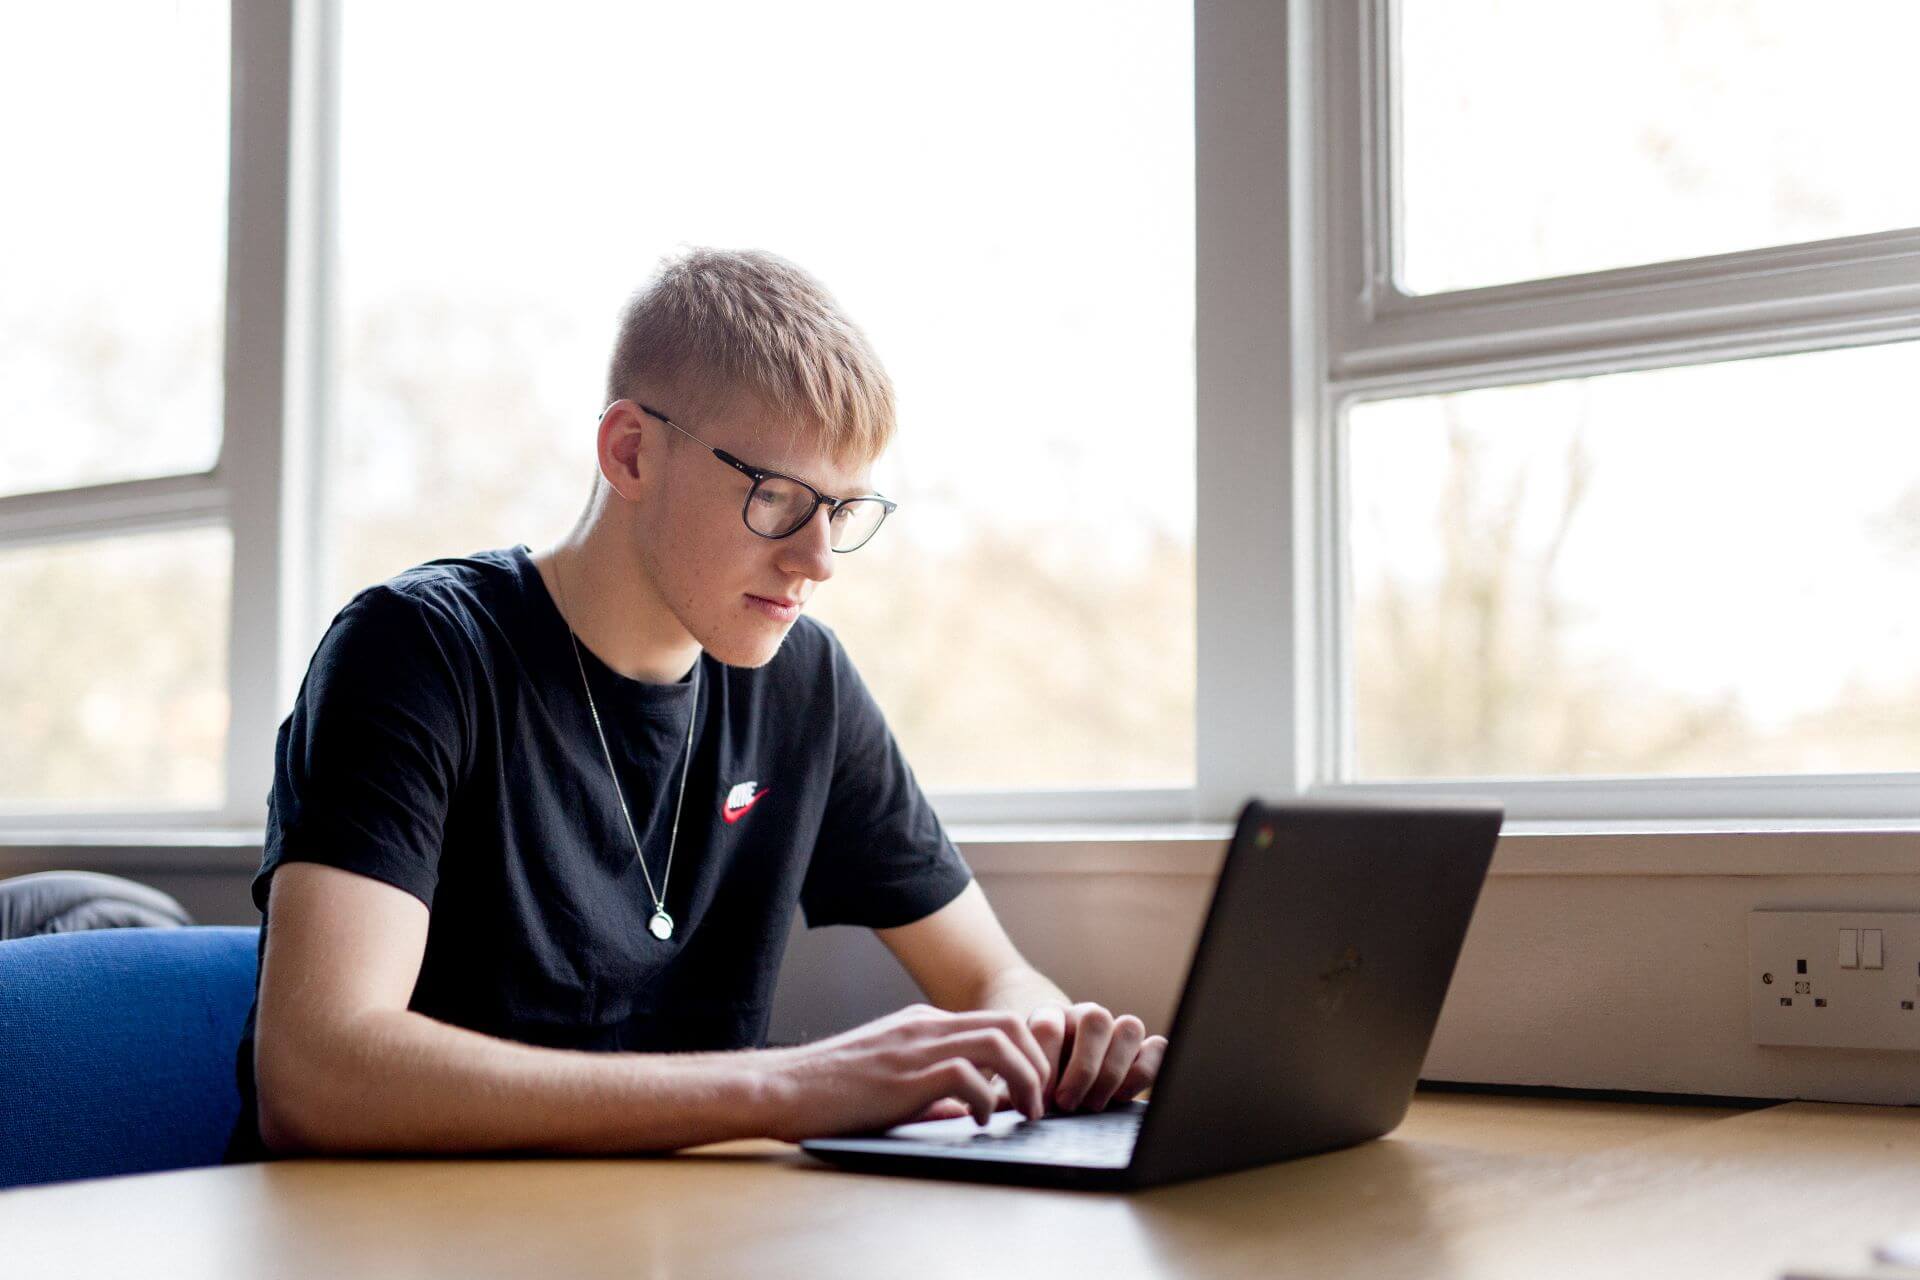 A student at a desk working on his laptop